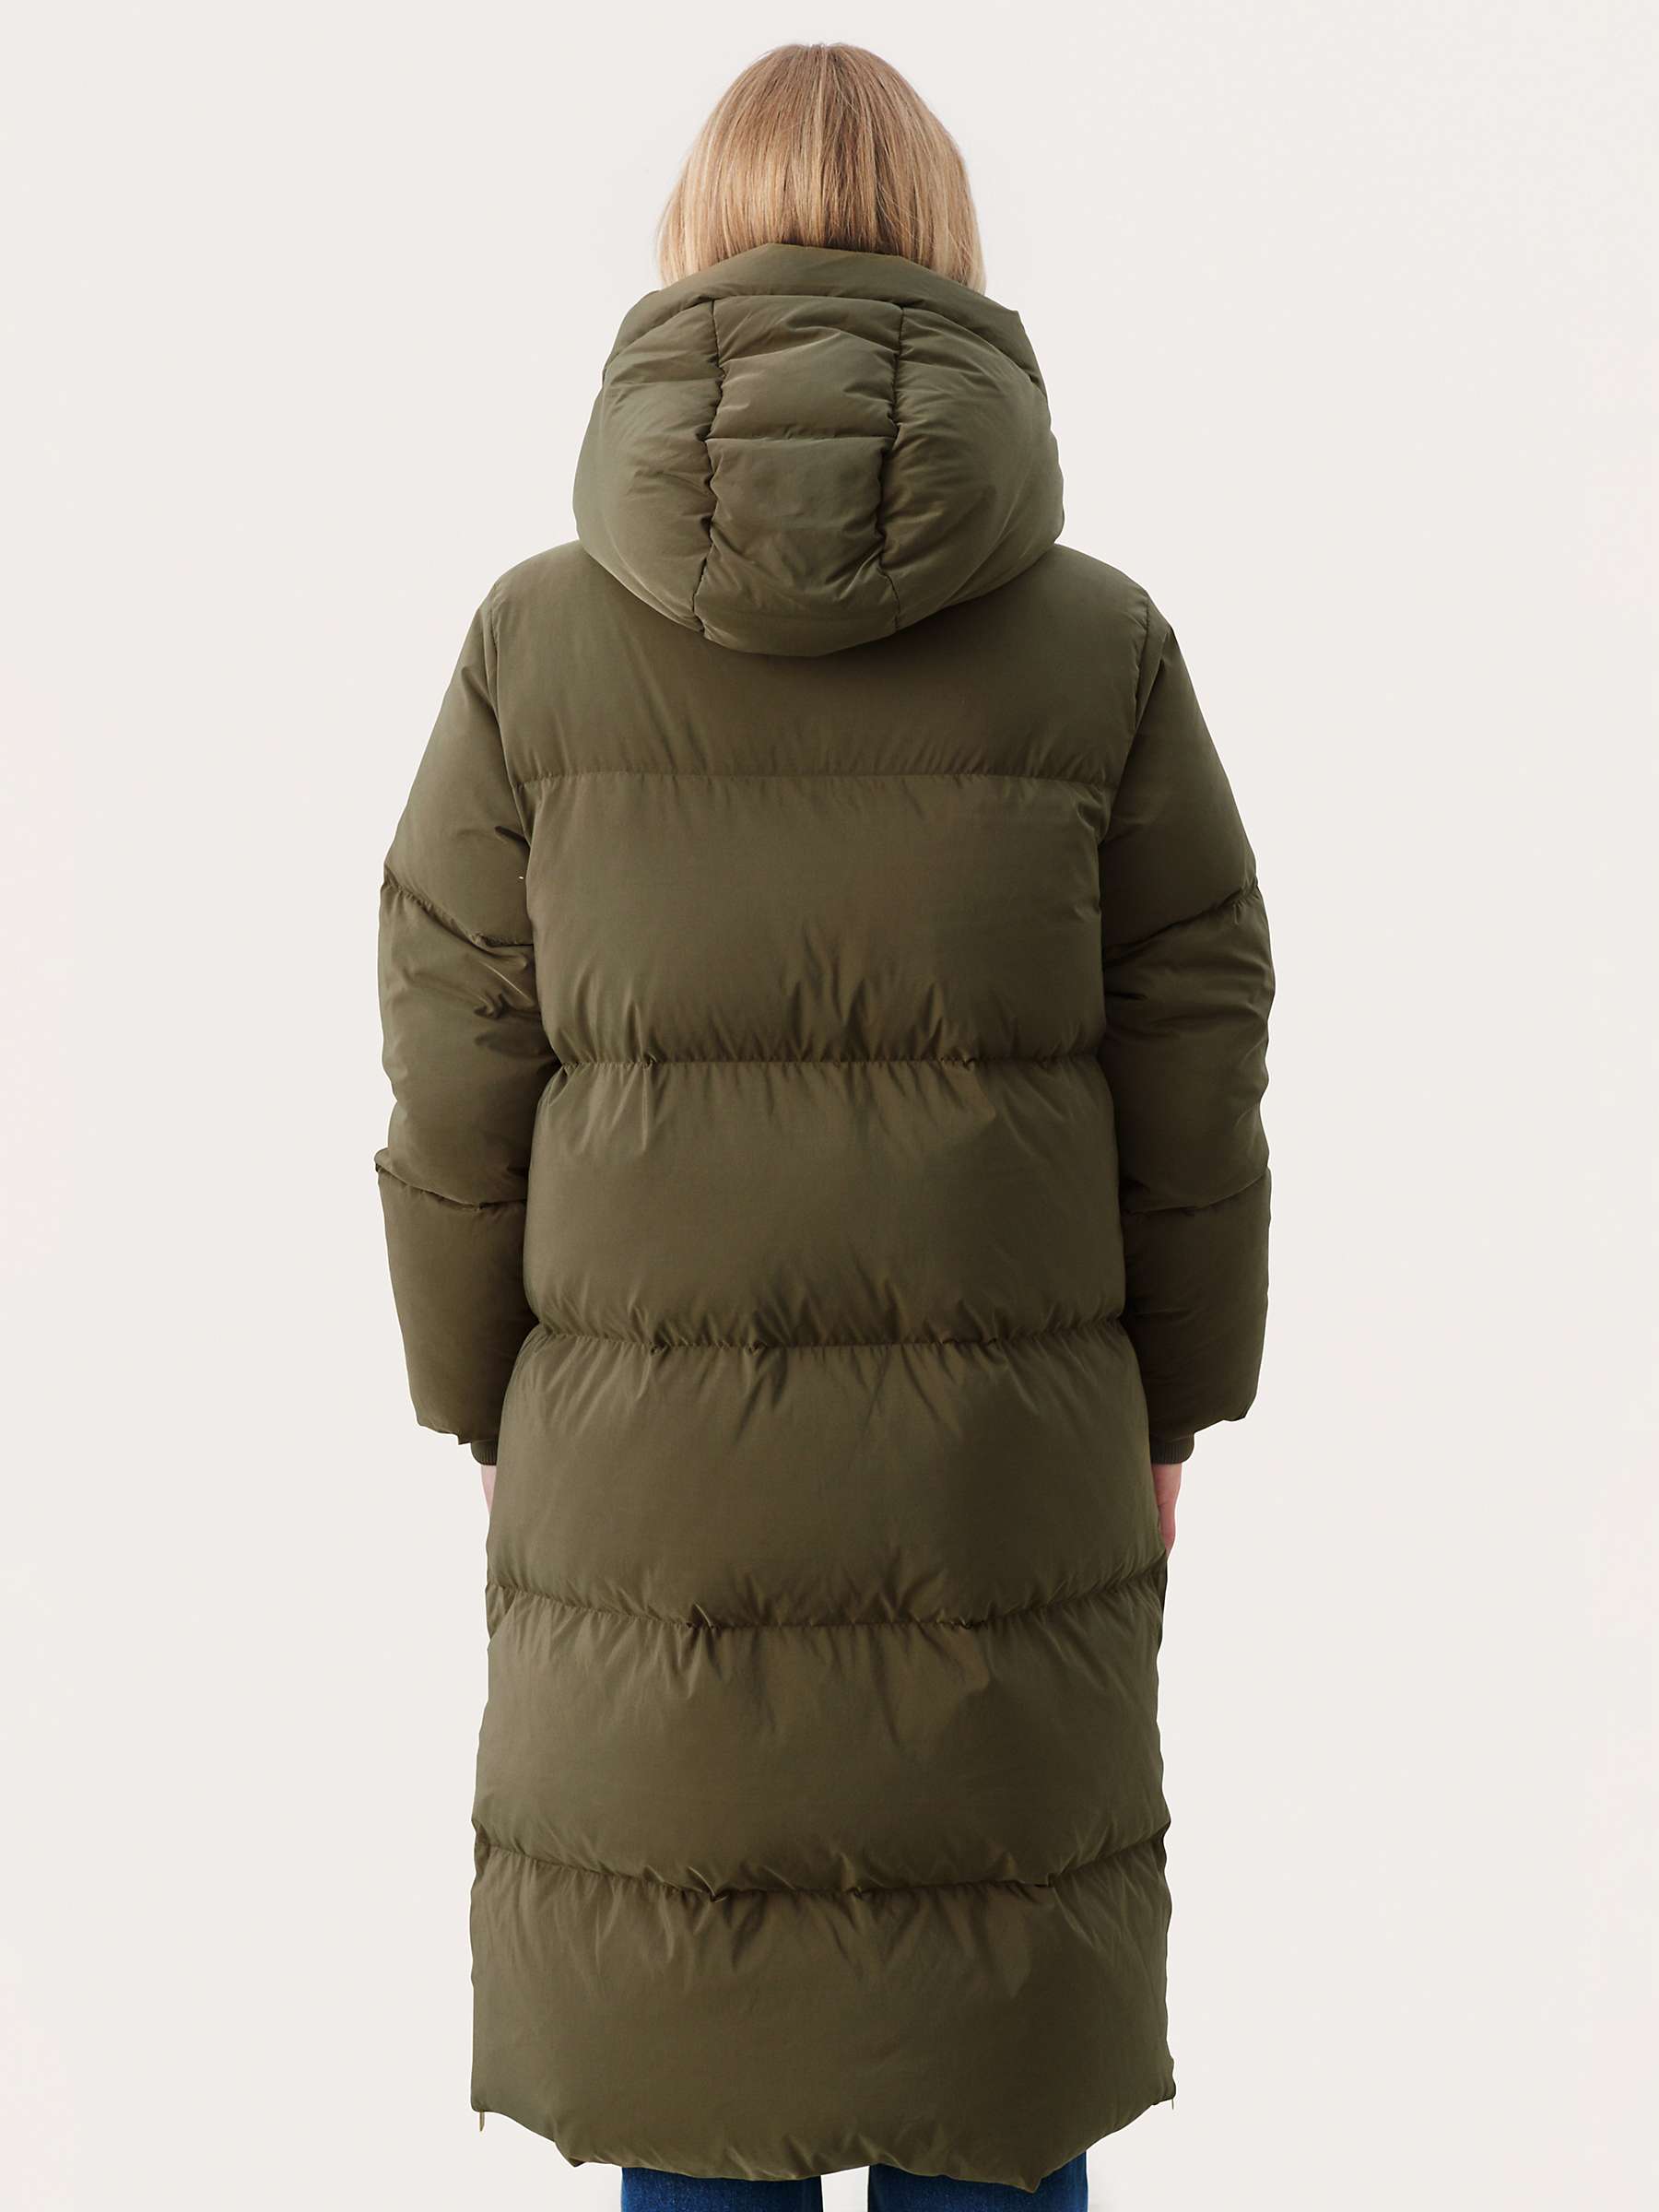 Buy Part Two Storma Longline Puffer Coat, Capers Online at johnlewis.com